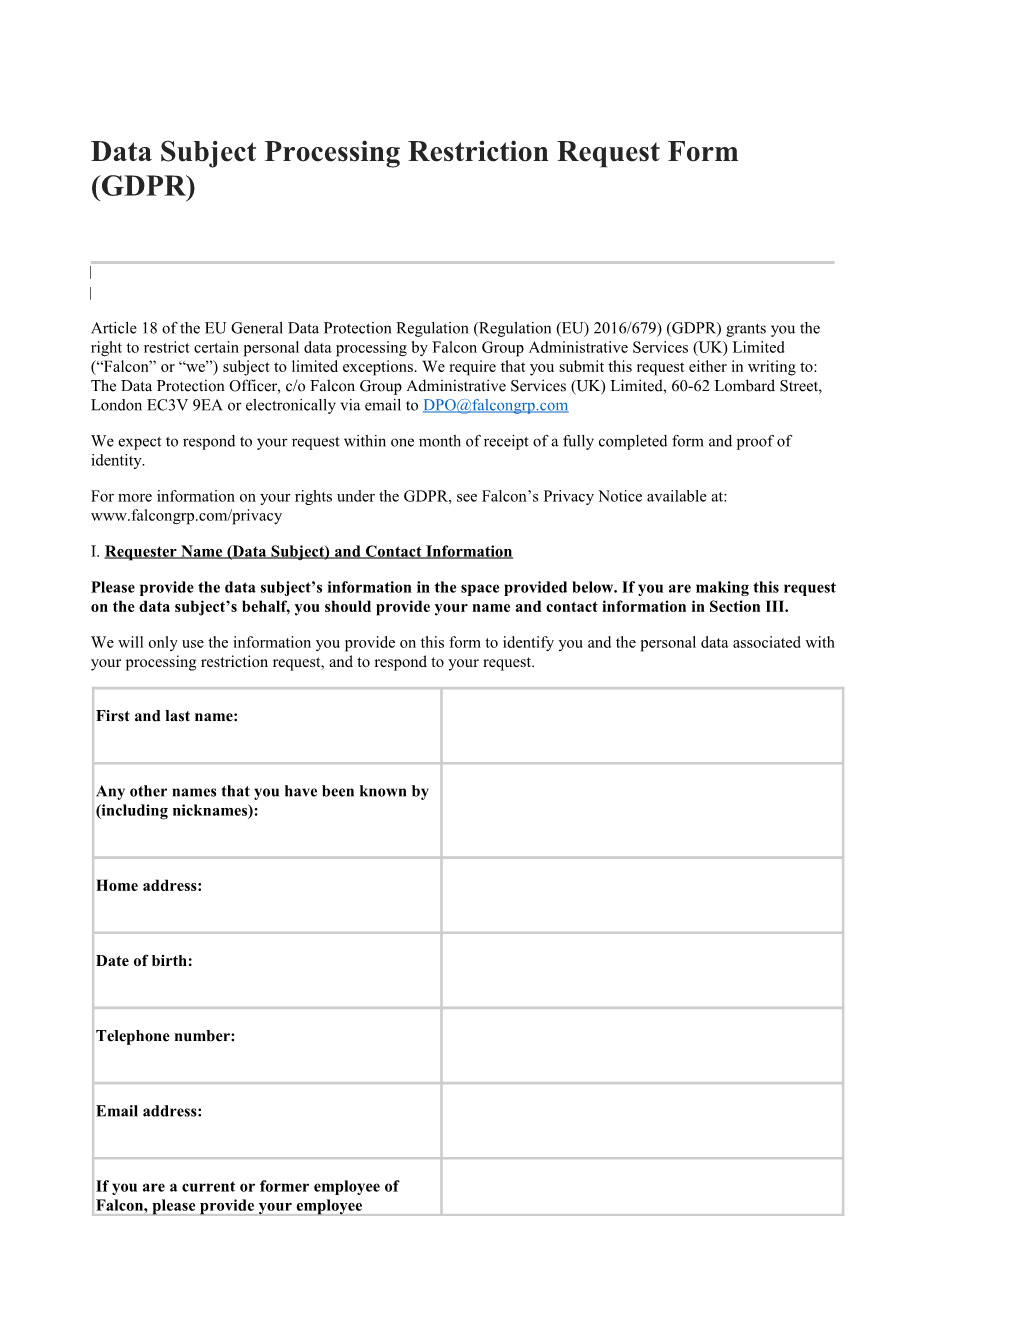 Data Subject Processing Restriction Request Form (GDPR)